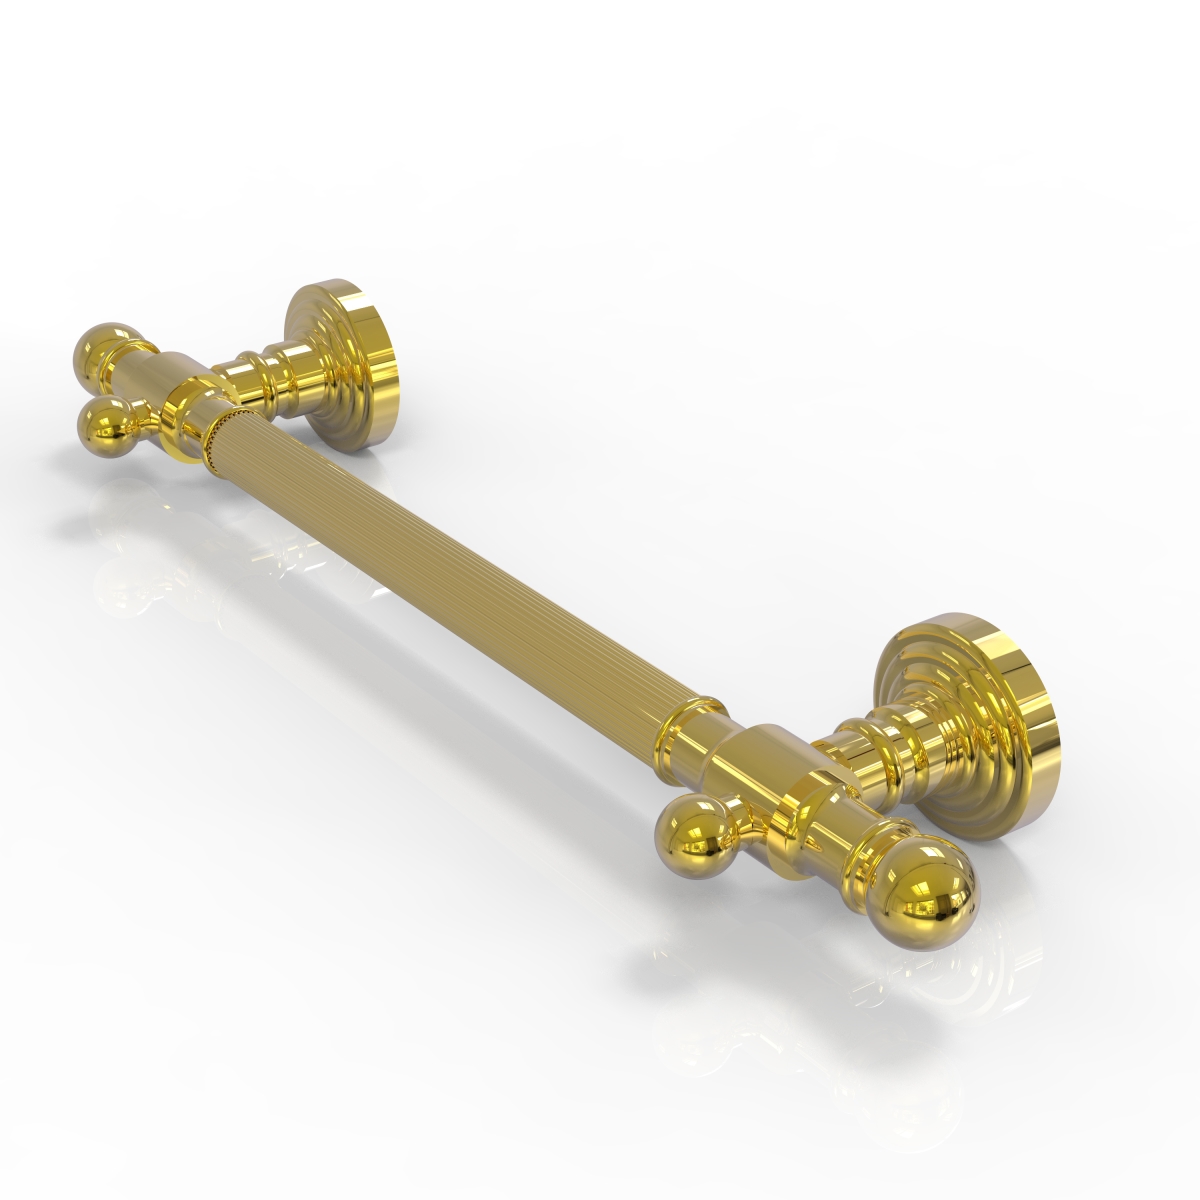 Picture of Allied Brass WP-GRR-36-PB 36 in. Reeded Grab Bar, Polished Brass - 3.5 x 42 x 36 in.